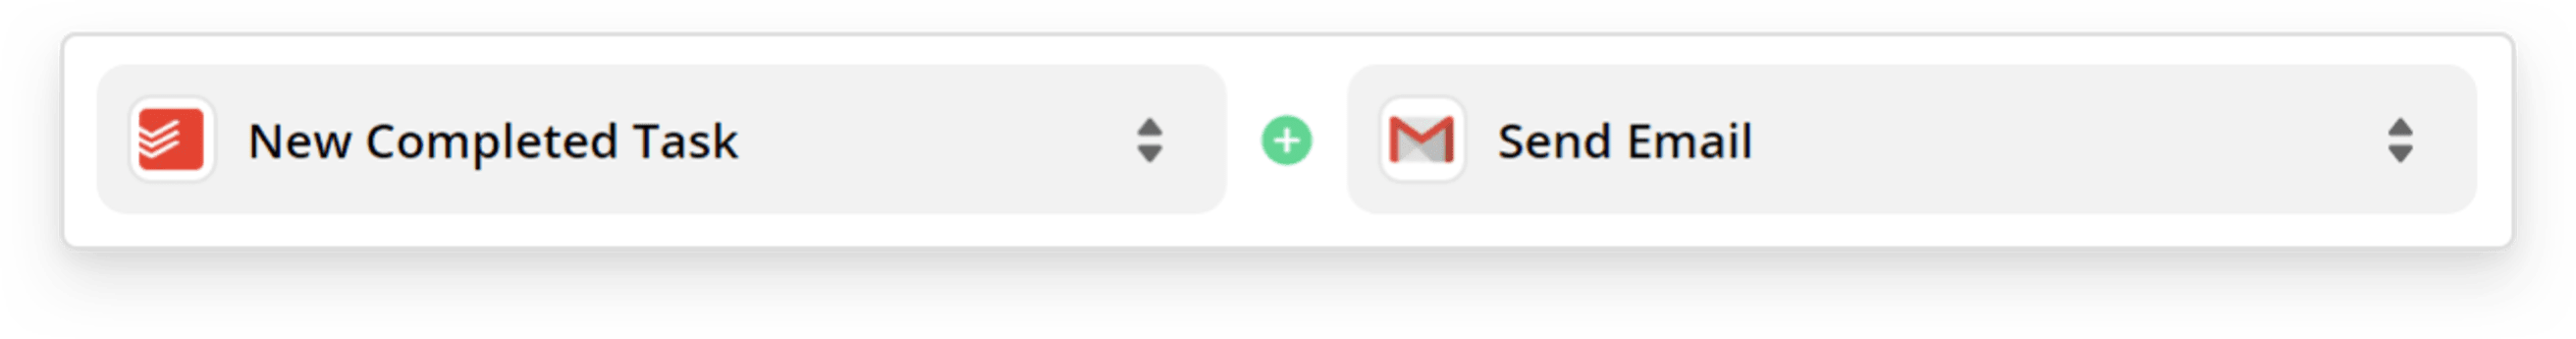 Send an email after completing a Todoist task